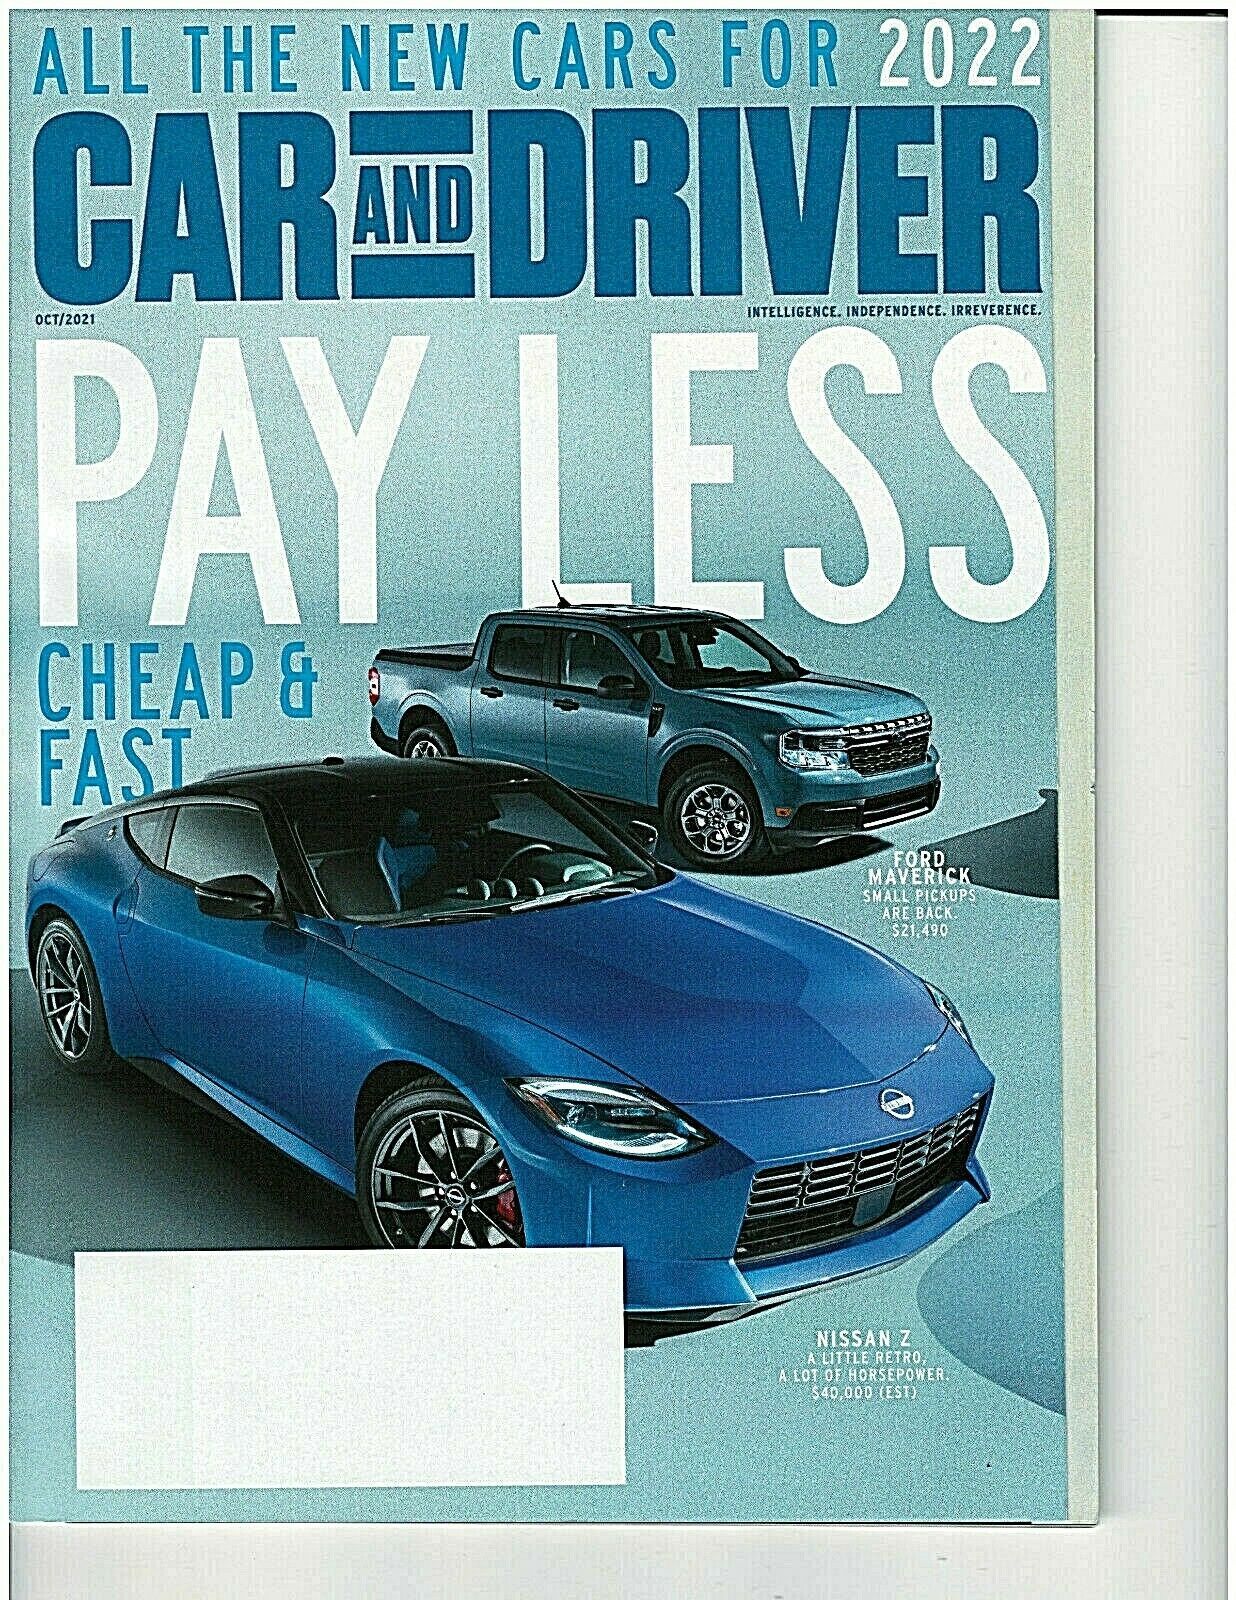 Primary image for CAR AND DRIVER MAGAZINE  OCTOBER 2021  ISSUE FEATURING ALL THE NEW CARS FOR 2022